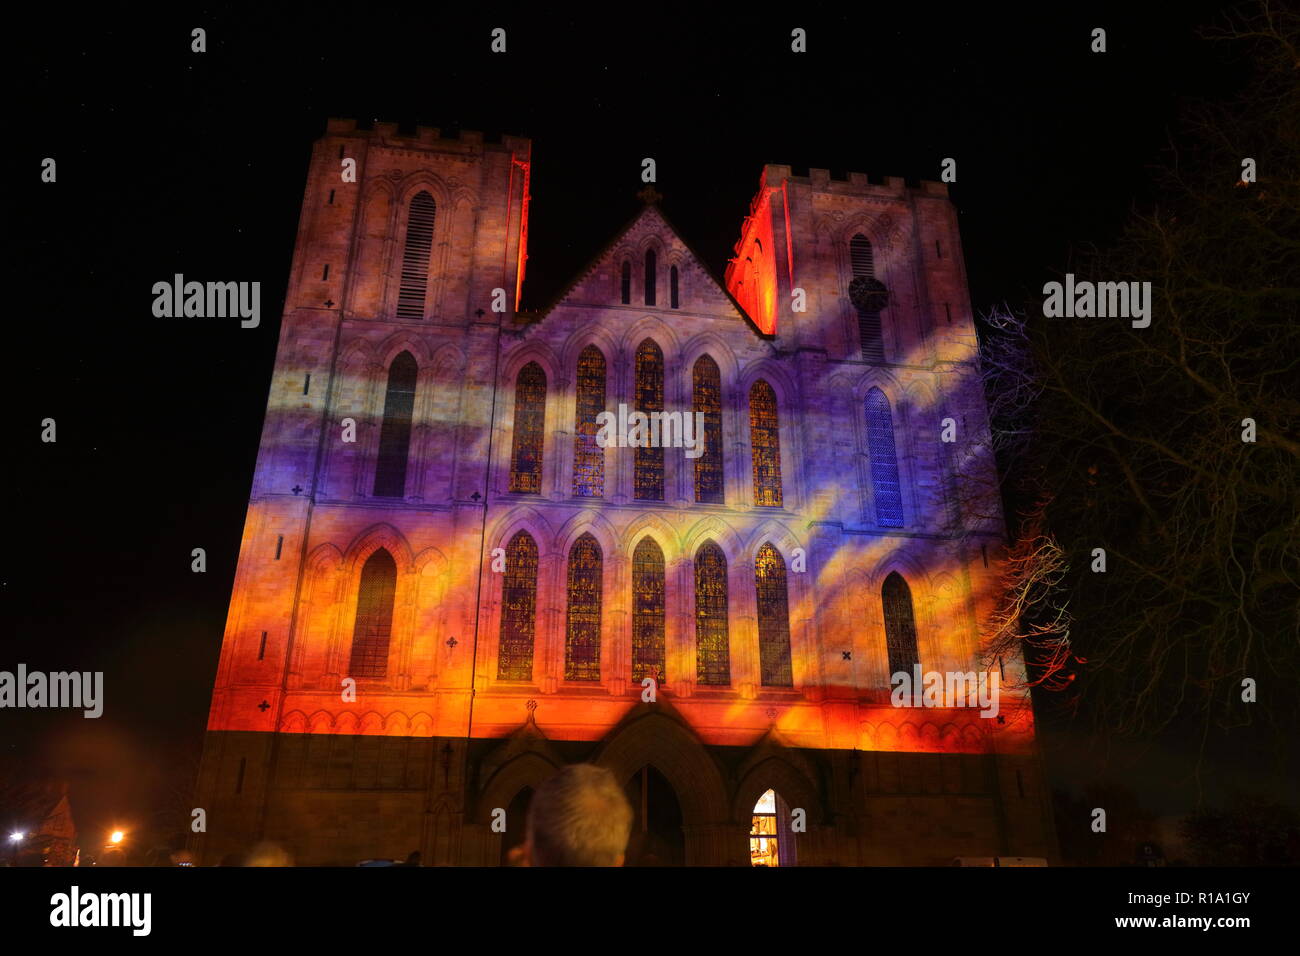 Ripon, North Yorkshire,10th November 2018. Ripon Cathedral lit up by animated projection, which shows photos from WW1 and lists of men who lost their lives during the war. Credit: Yorkshire Pics/Alamy Live News Stock Photo